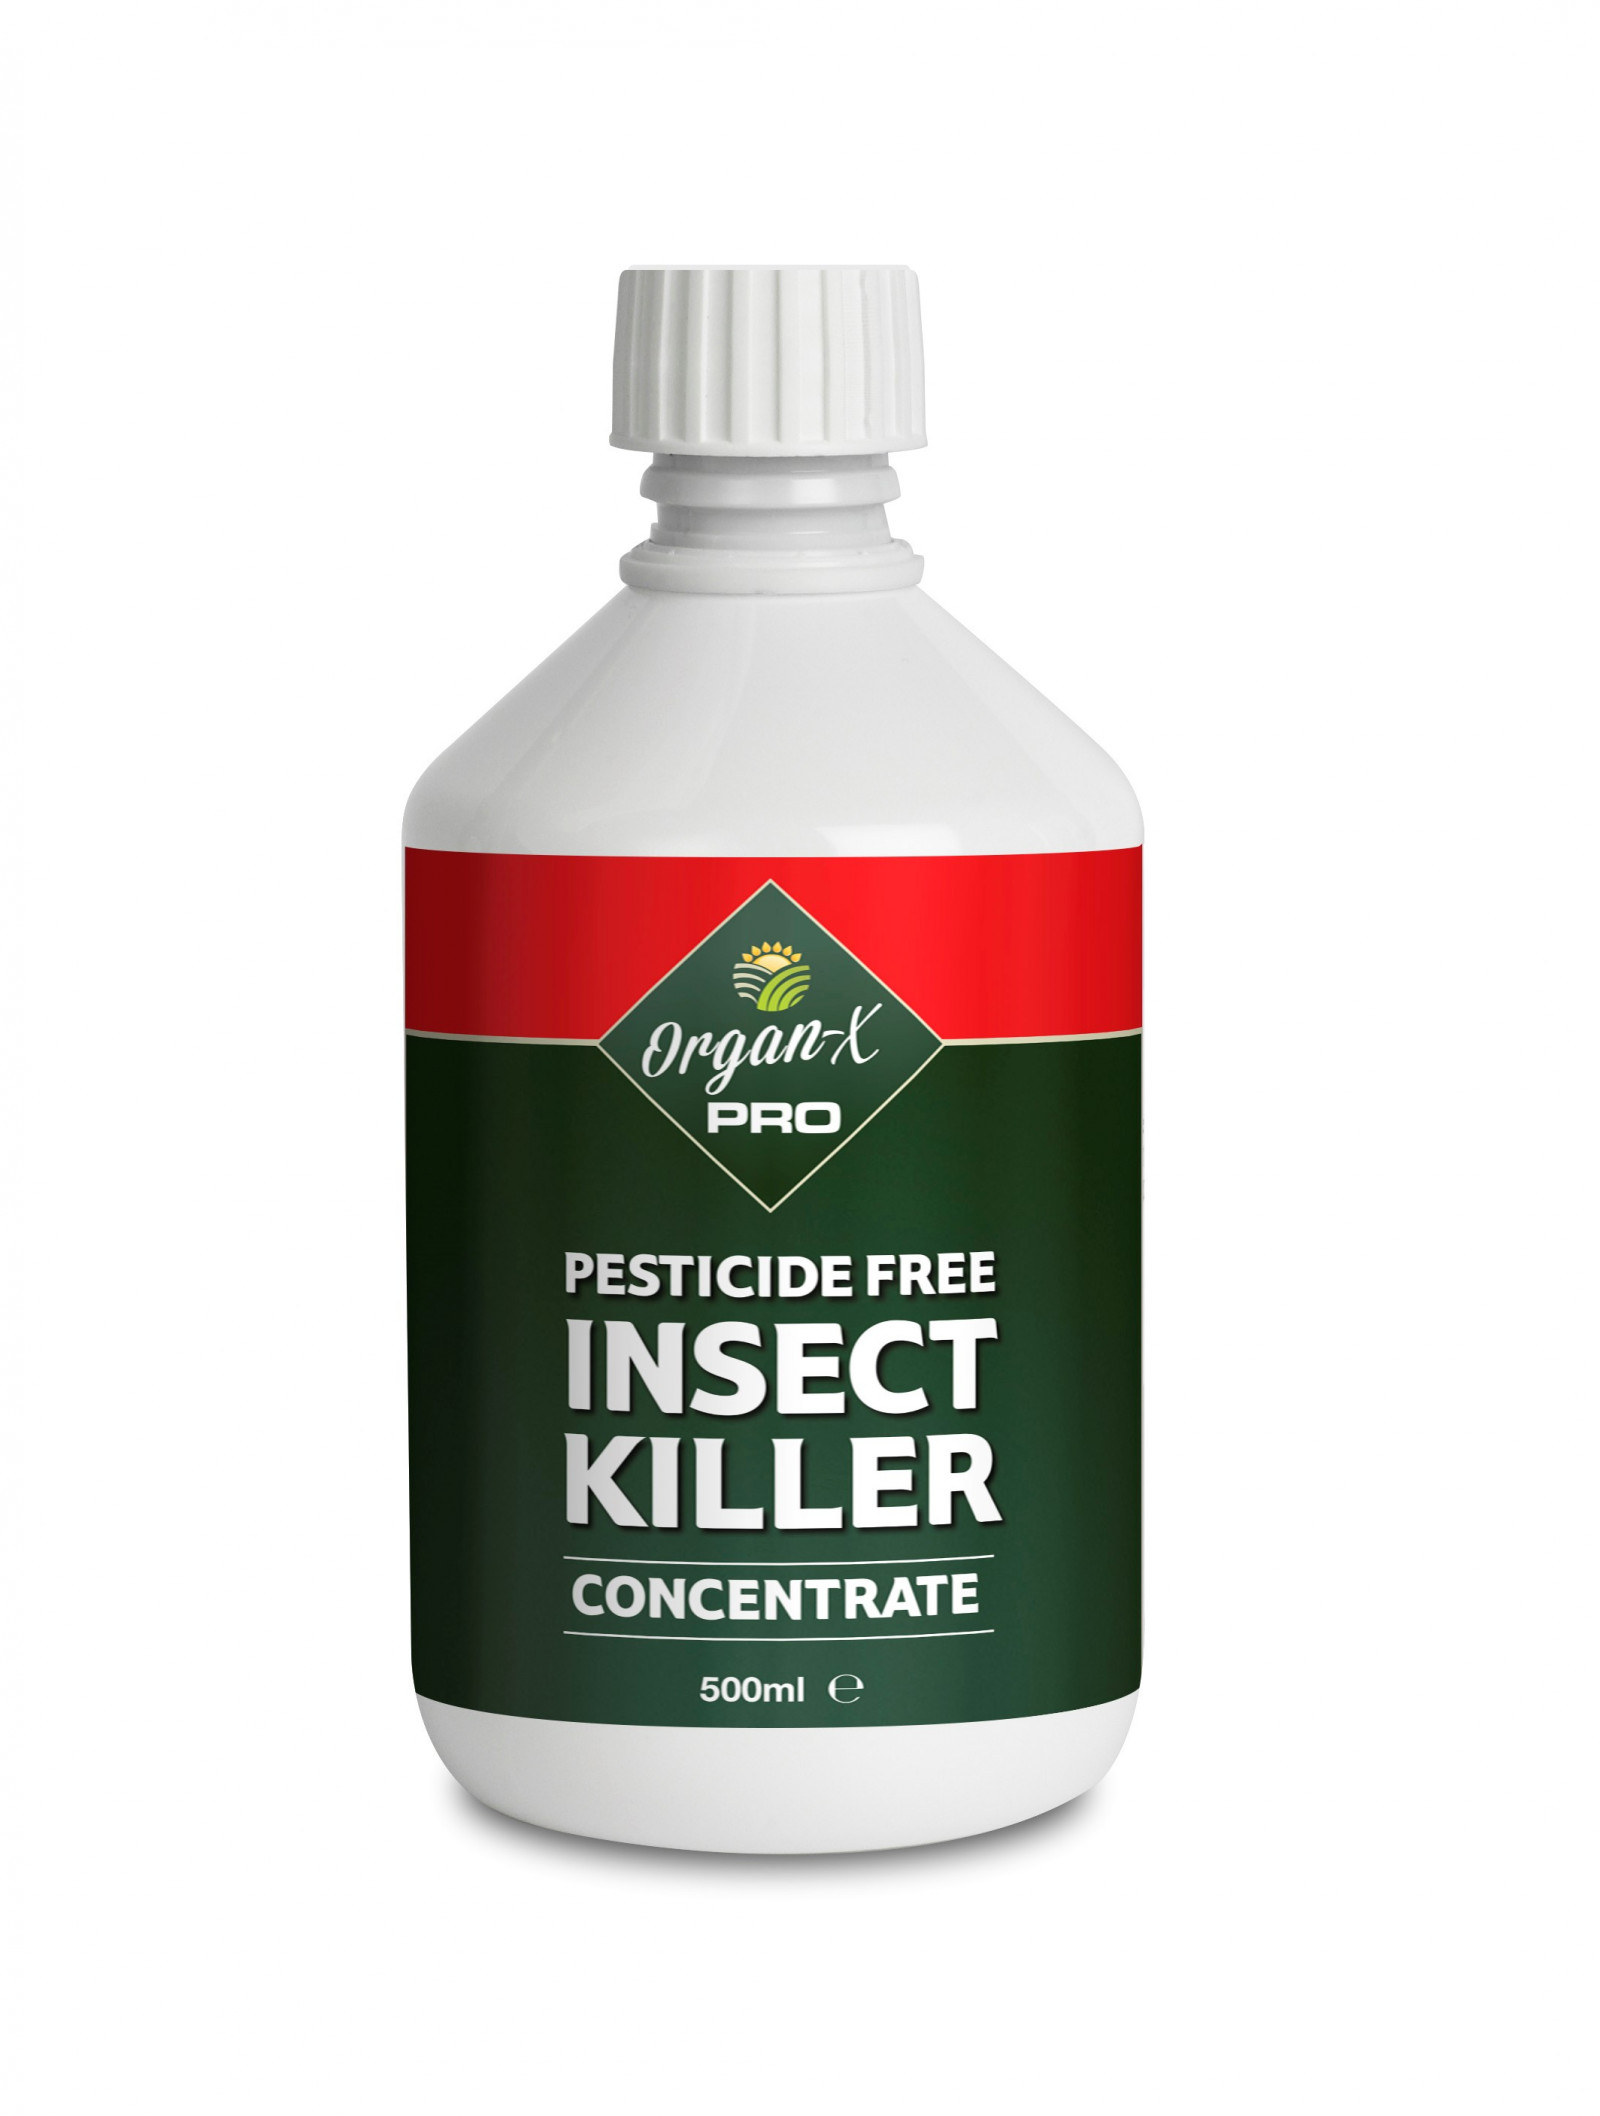 Organ-X Pro Insect Killer Concentrate